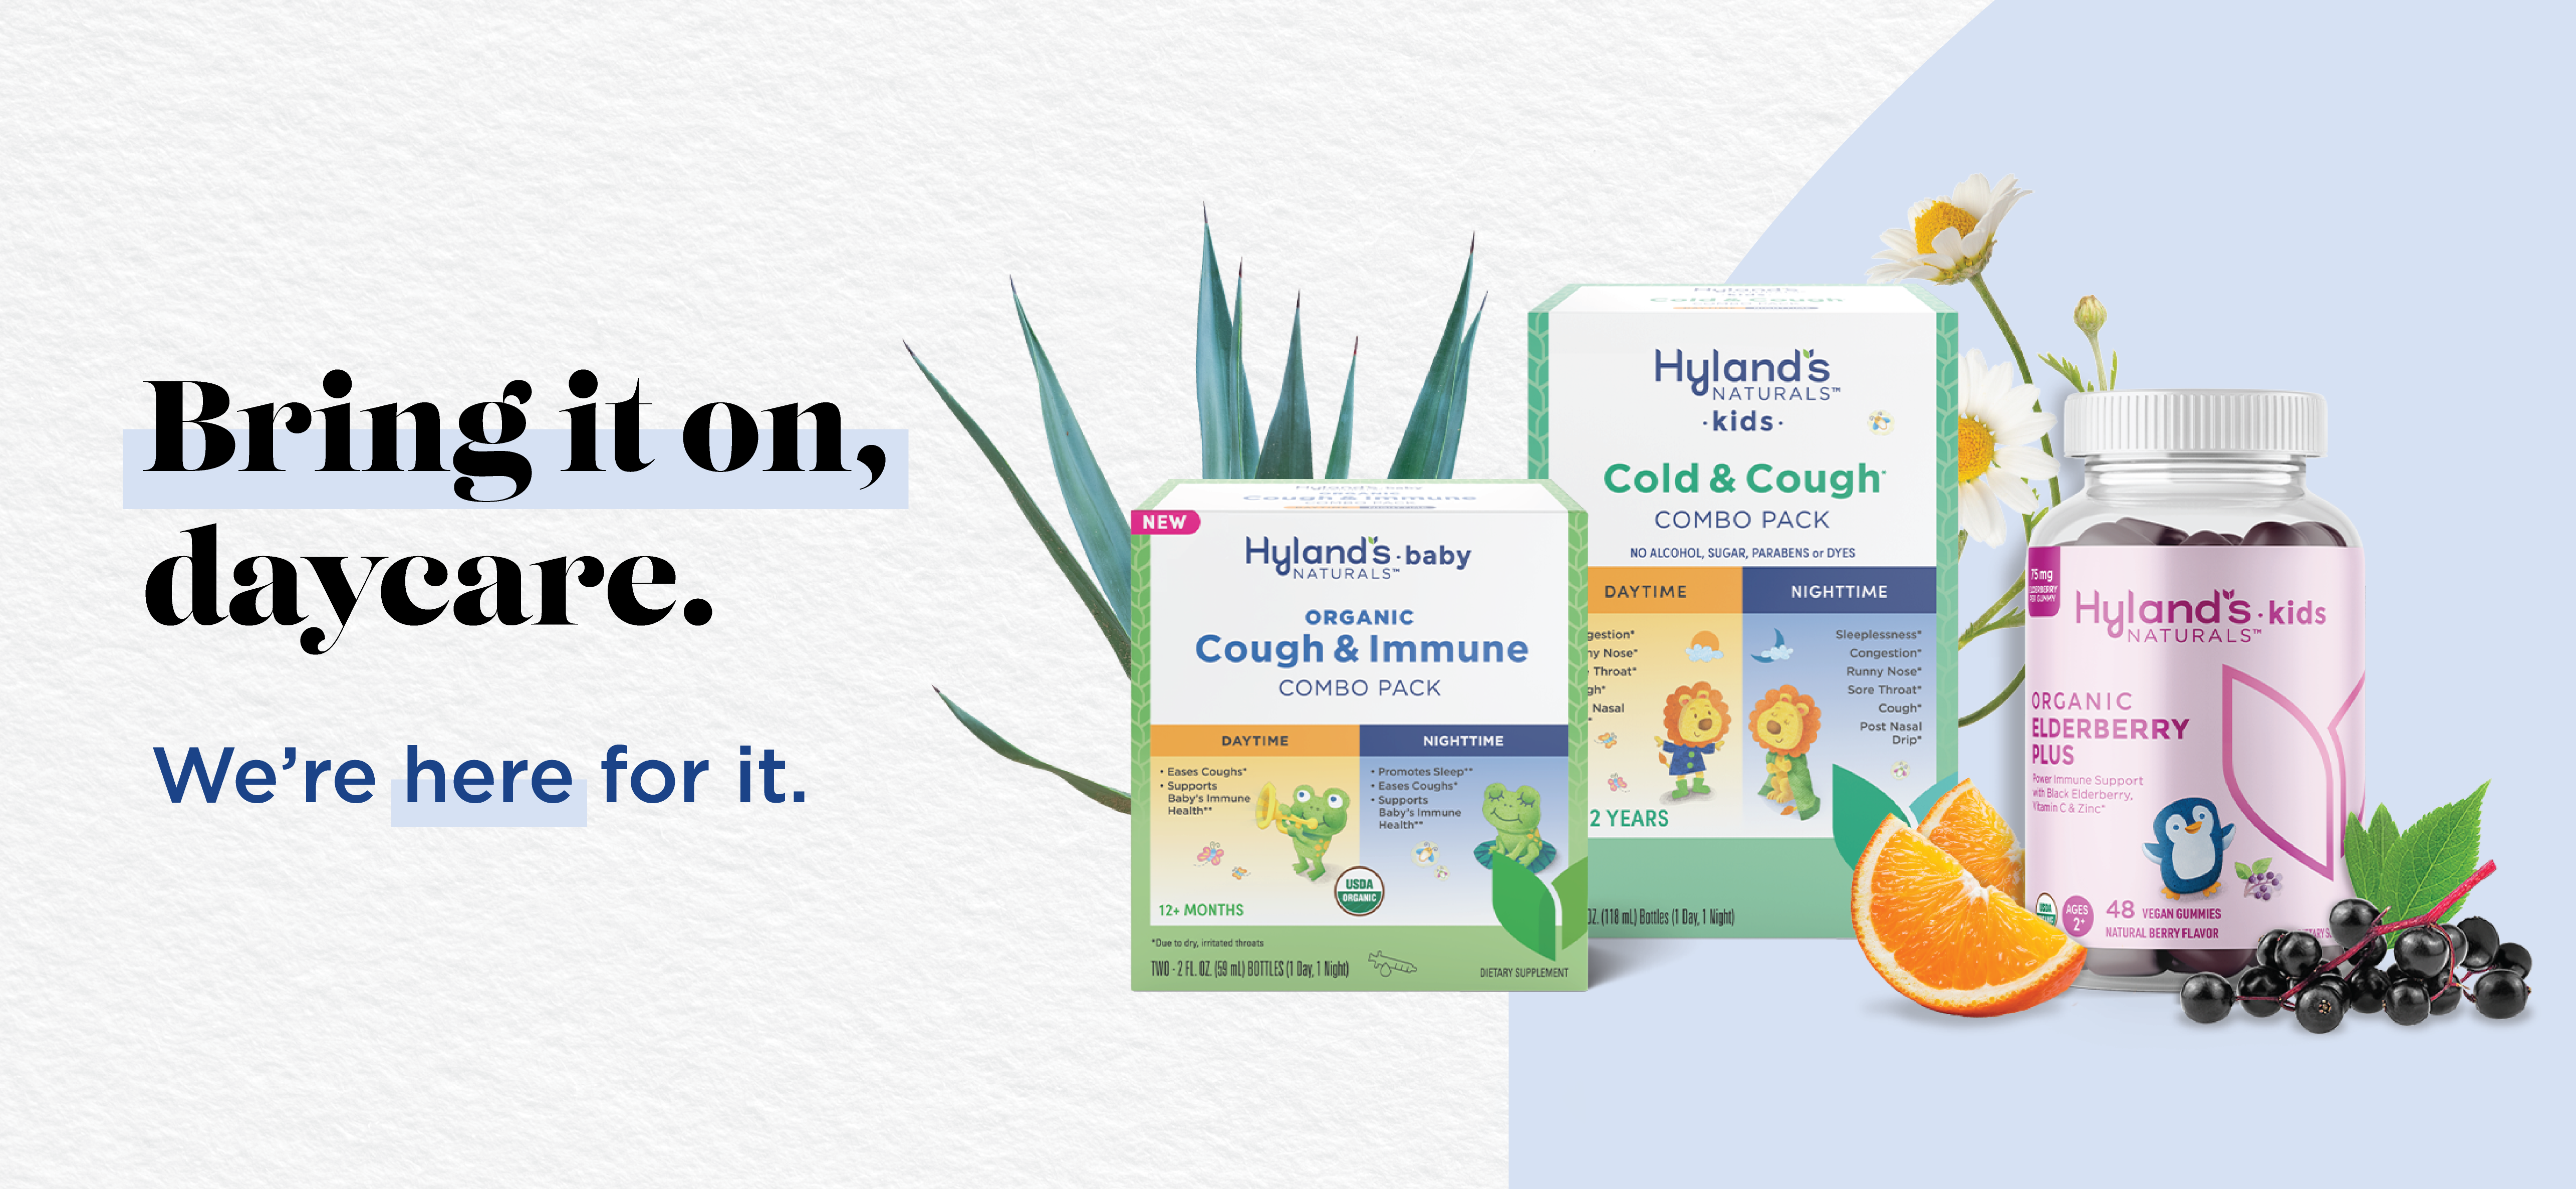 Bring it on, daycare. We're here for it. Try Hylands Baby Organic Cough & Immune Combo Pack, Hylands Kids Cold & Cough Combo Pack, and Hyland's Kids Organic Elderberry Plus supplements.